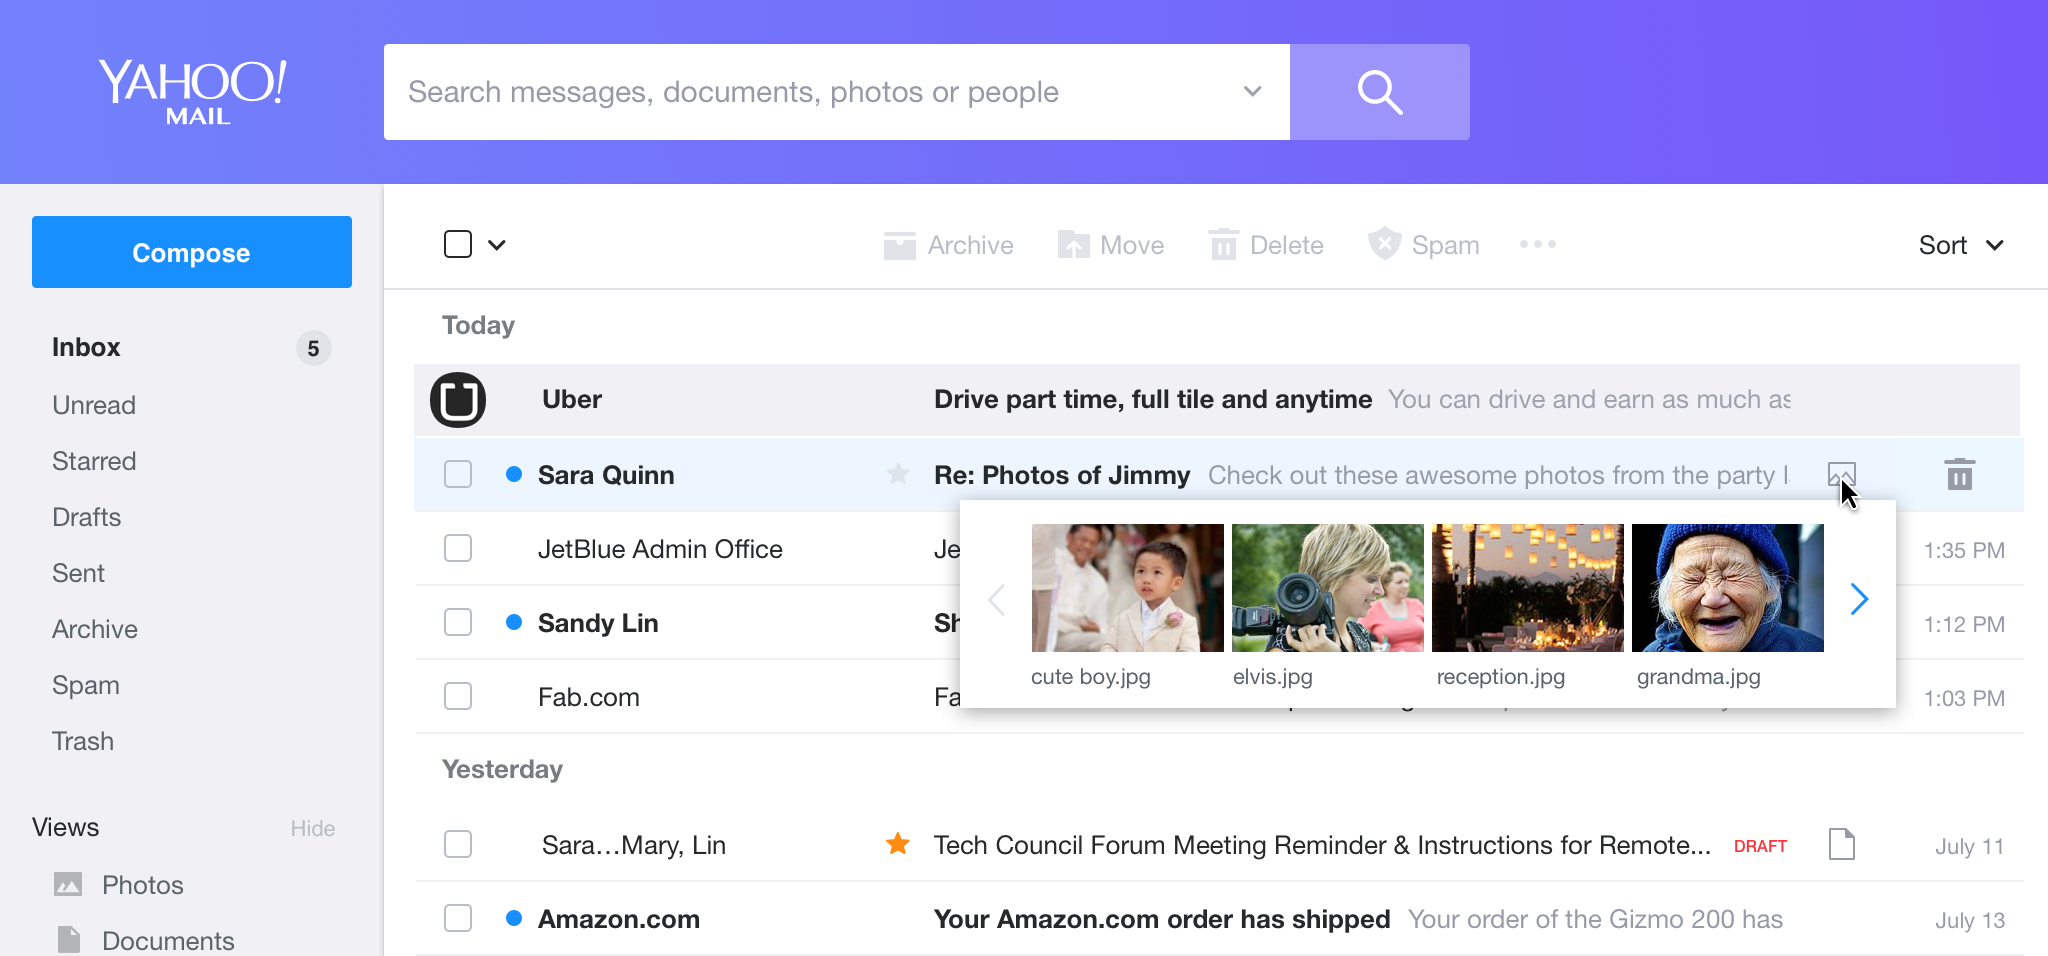 Yahoo Mail rolls out a rebuilt, redesigned service, including a new ad-free...